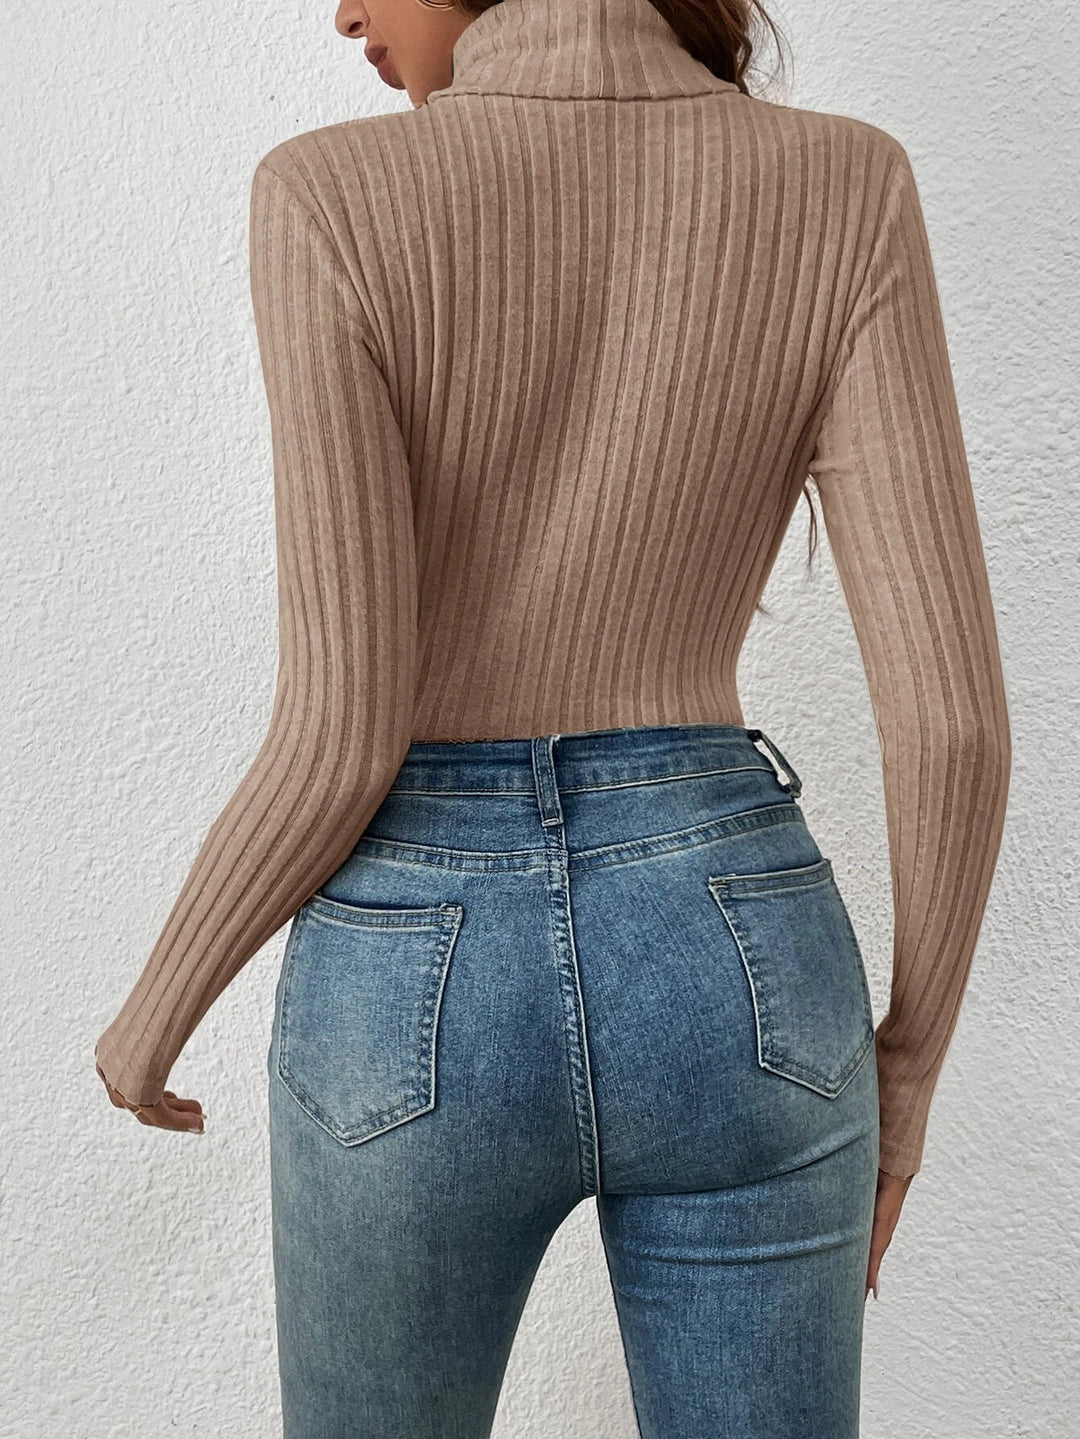 Turtle Neck Ribbed Knit Tee Bodysuit